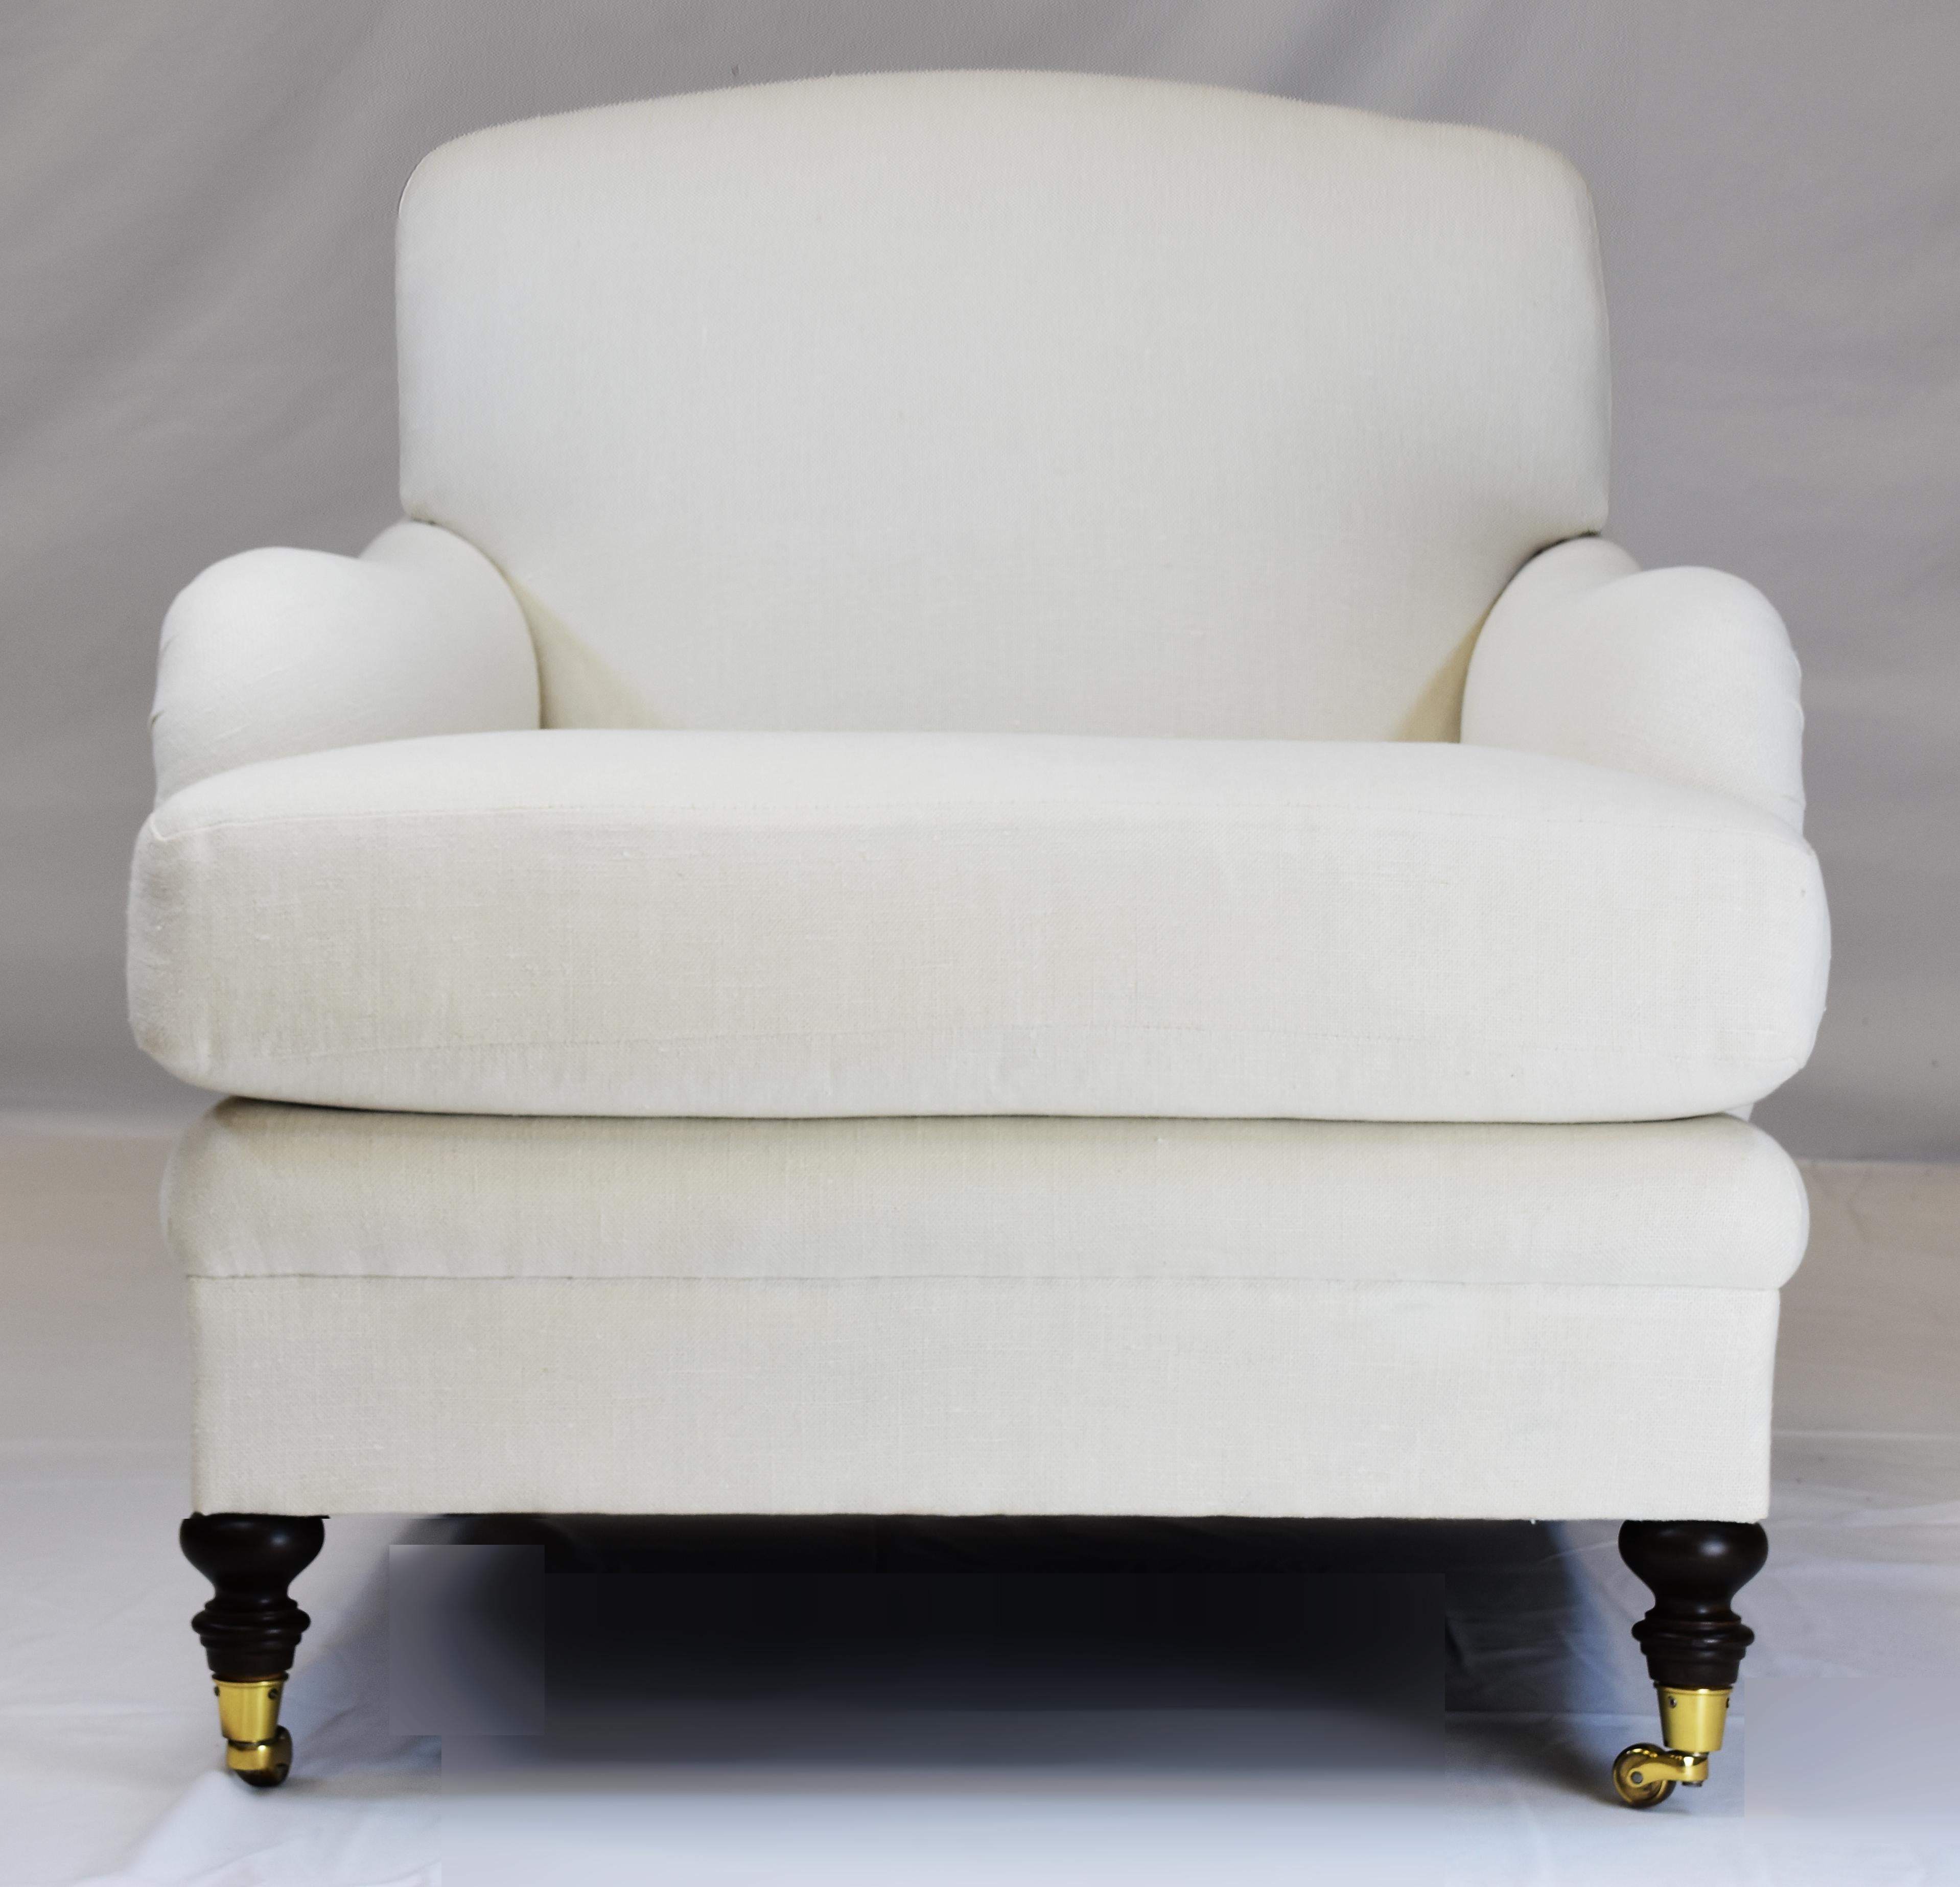 Le Jeune Upholstery Hampton Chair Showroom Model On Casters

Offered for sale is an off white Le Jeune Upholstery English style HAMPTON C1 .923 armchair showroom model. 	This chair is a medium-sized scaled traditional lounge chair with an